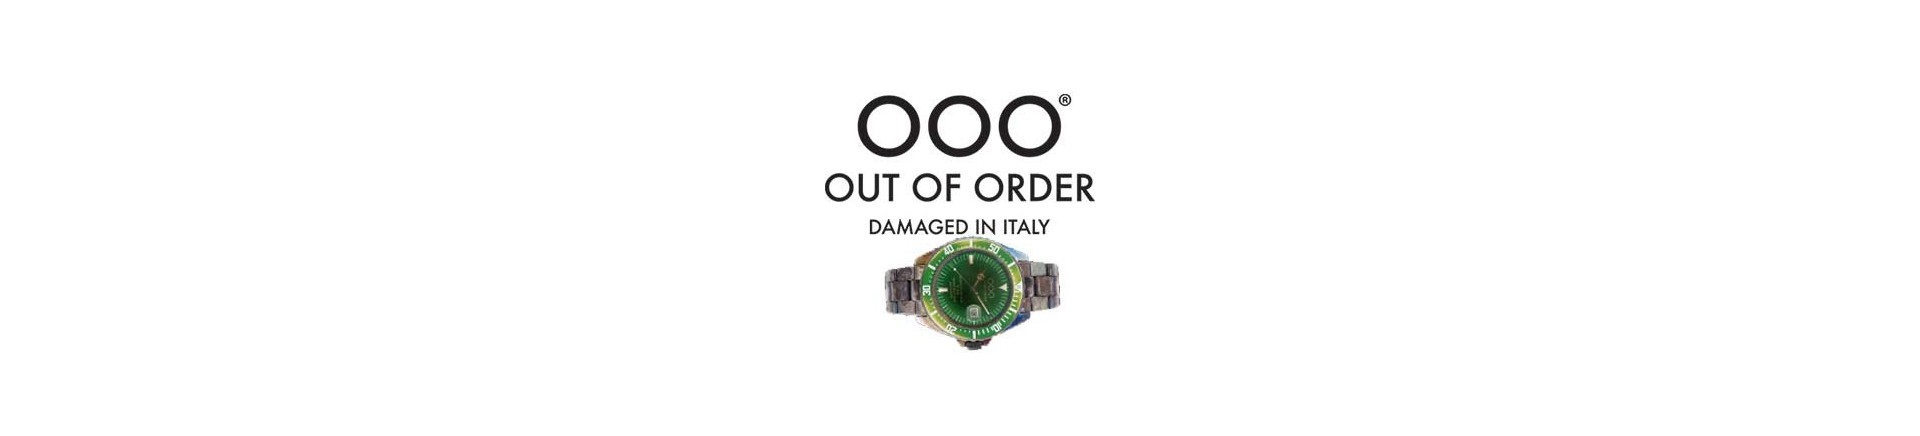 montre OOO out of order